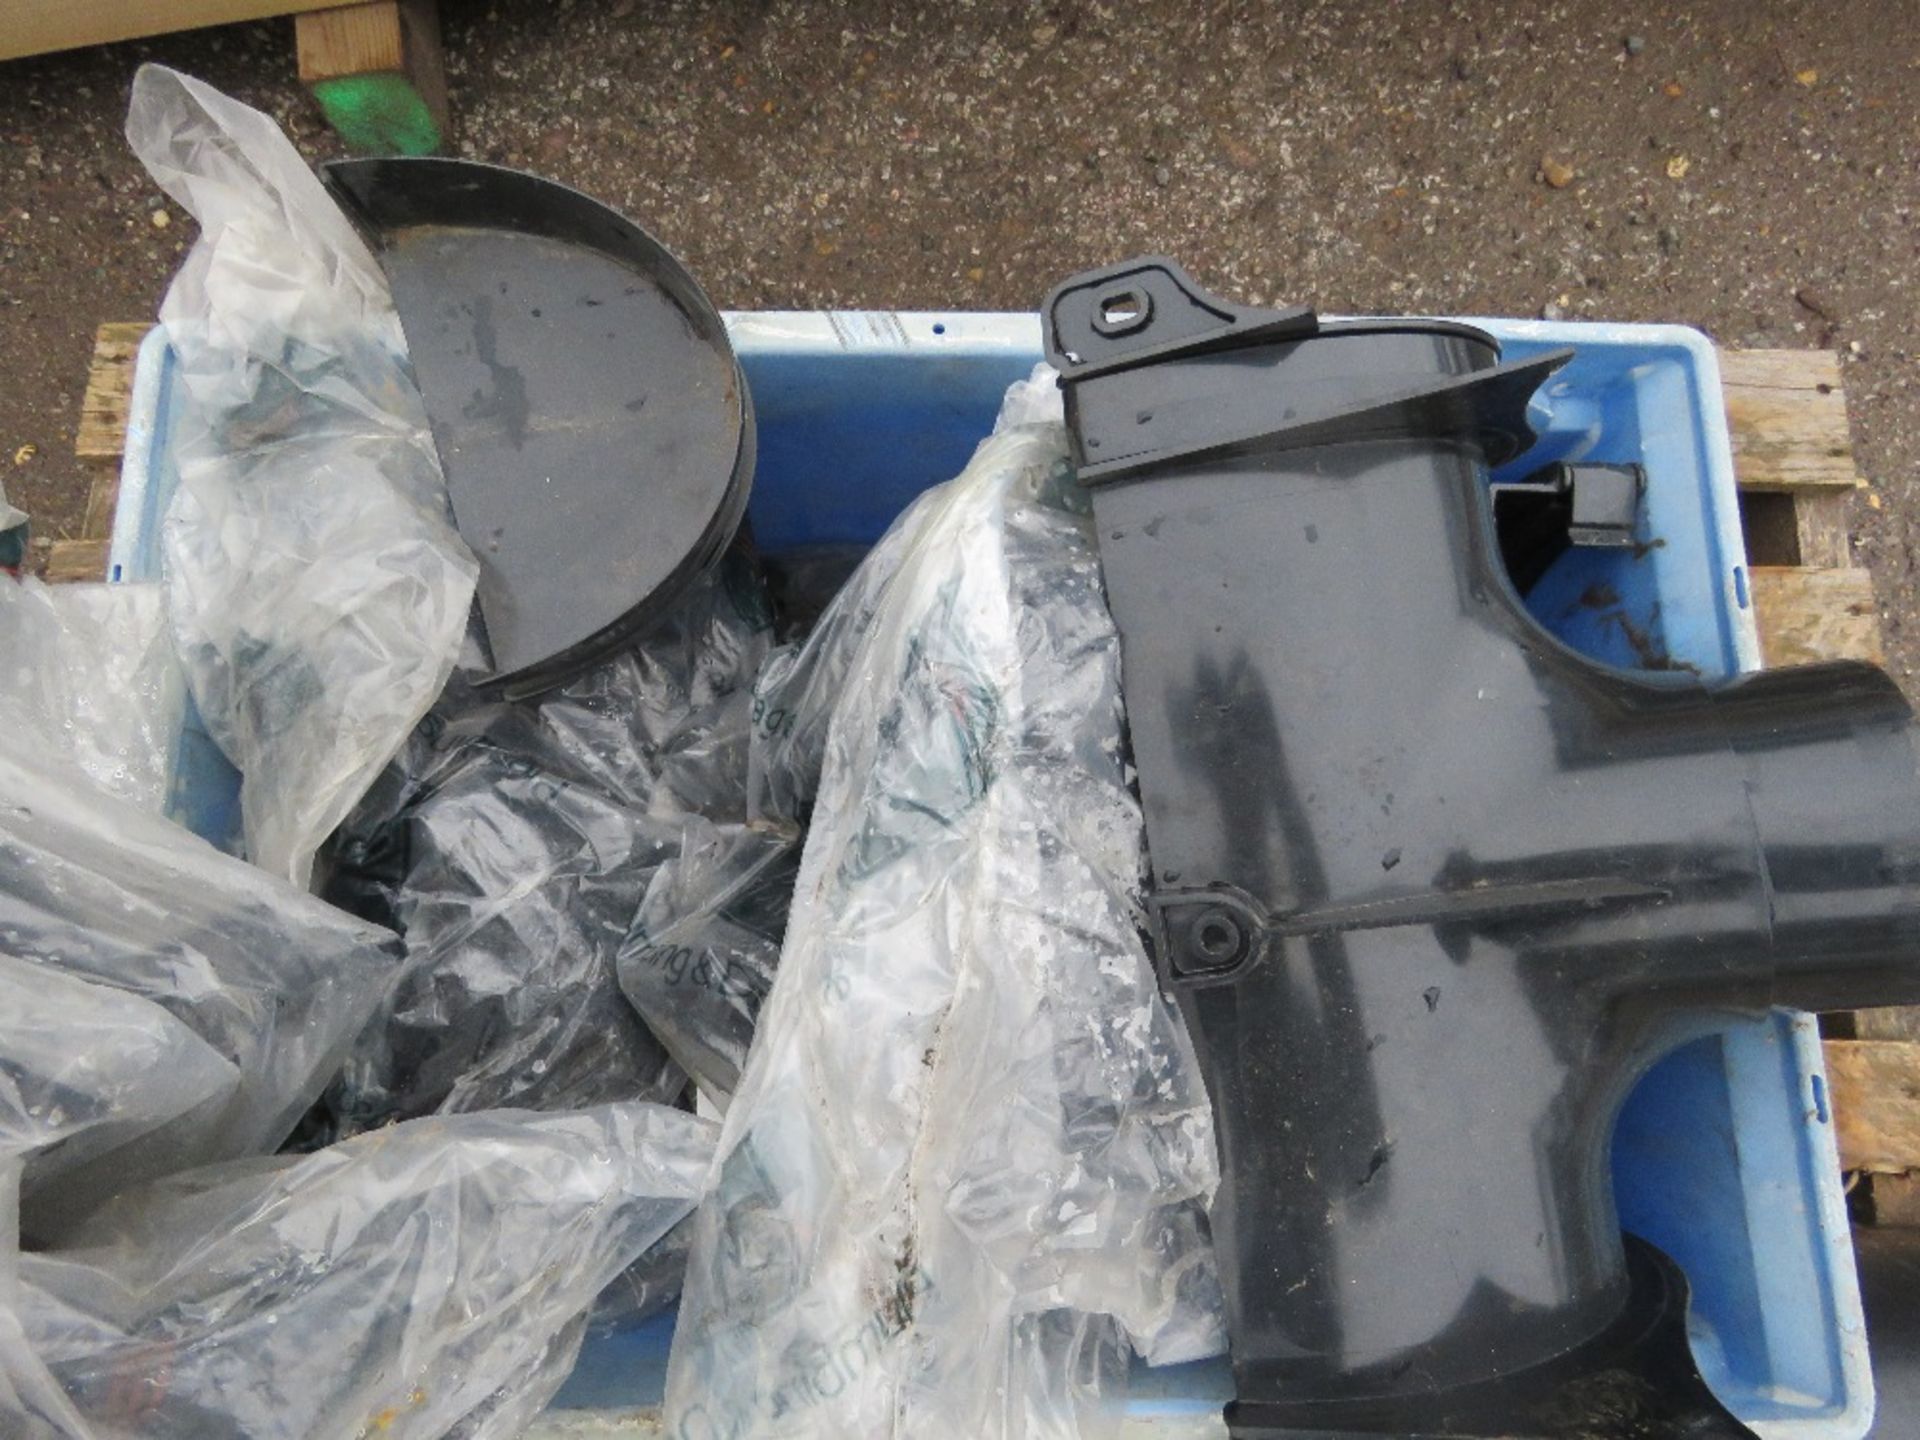 7 X LENGTHS OF LARGE FLOW PLASTIC GUTTER PLUS FITTINGS, UNUSED. 20CM WIDTH X 4M LENGTH APPROX. TH - Image 3 of 5